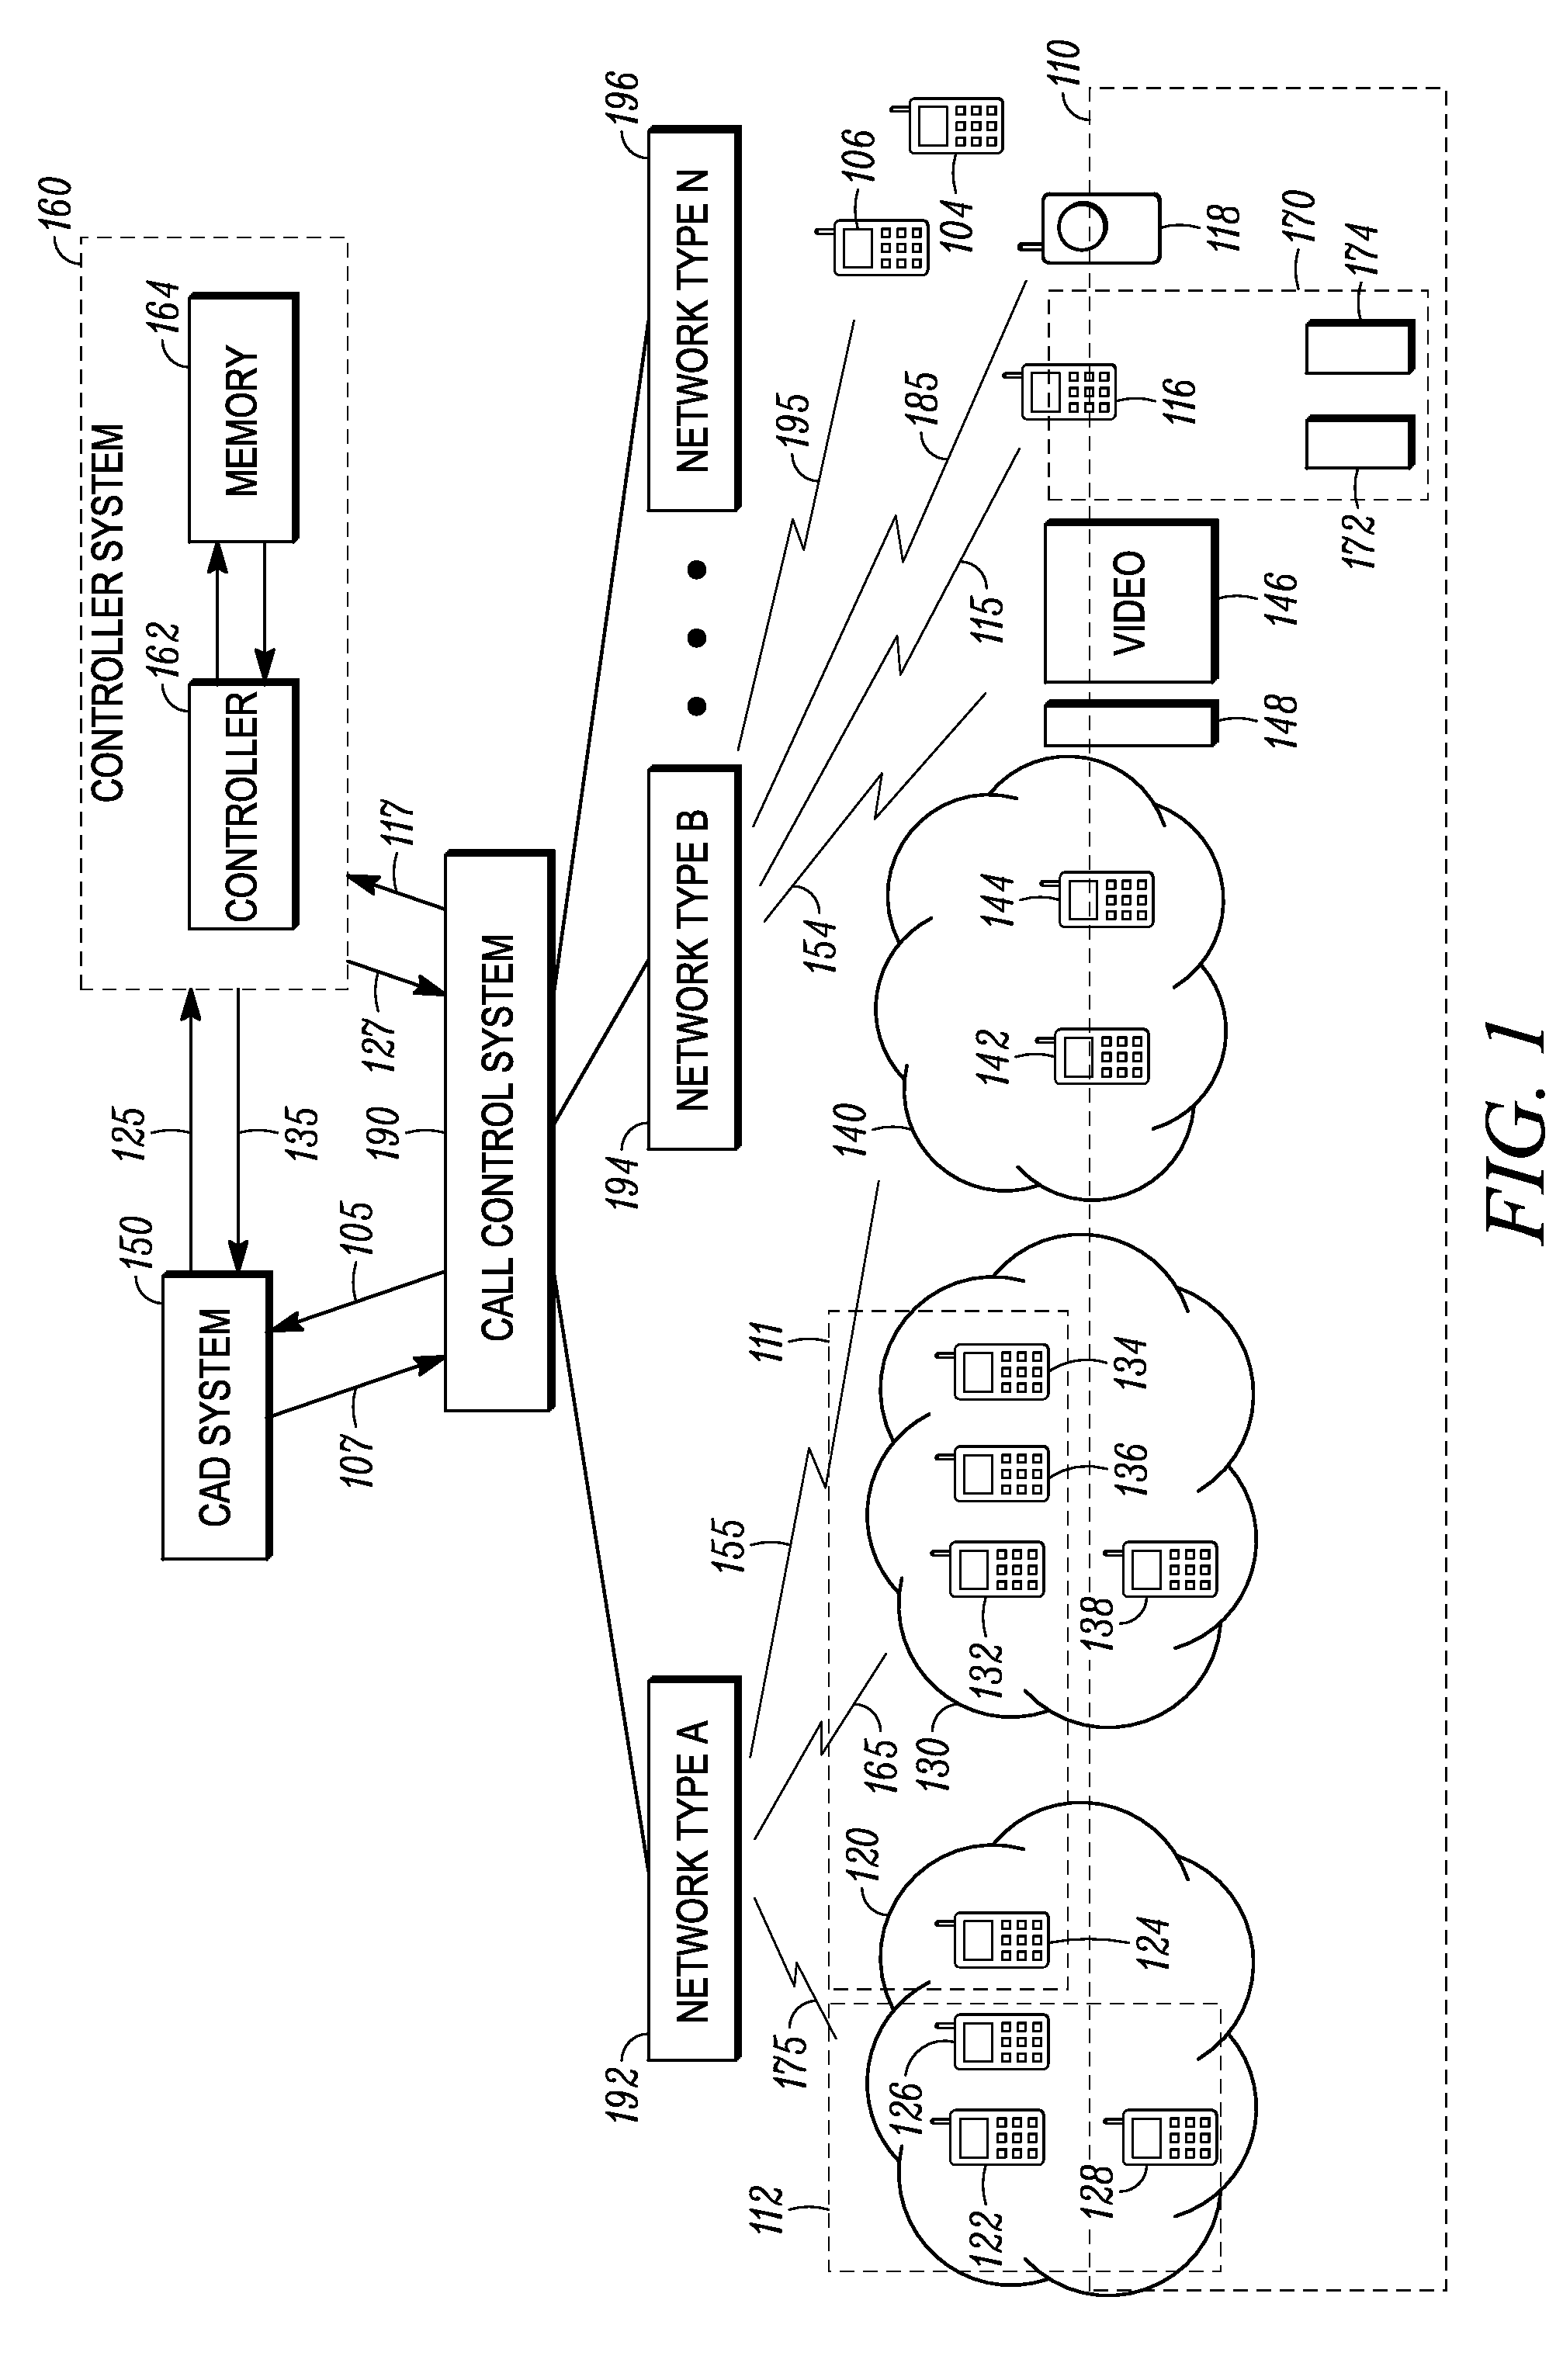 Method and system for forming a communication group for content distribution related to an event